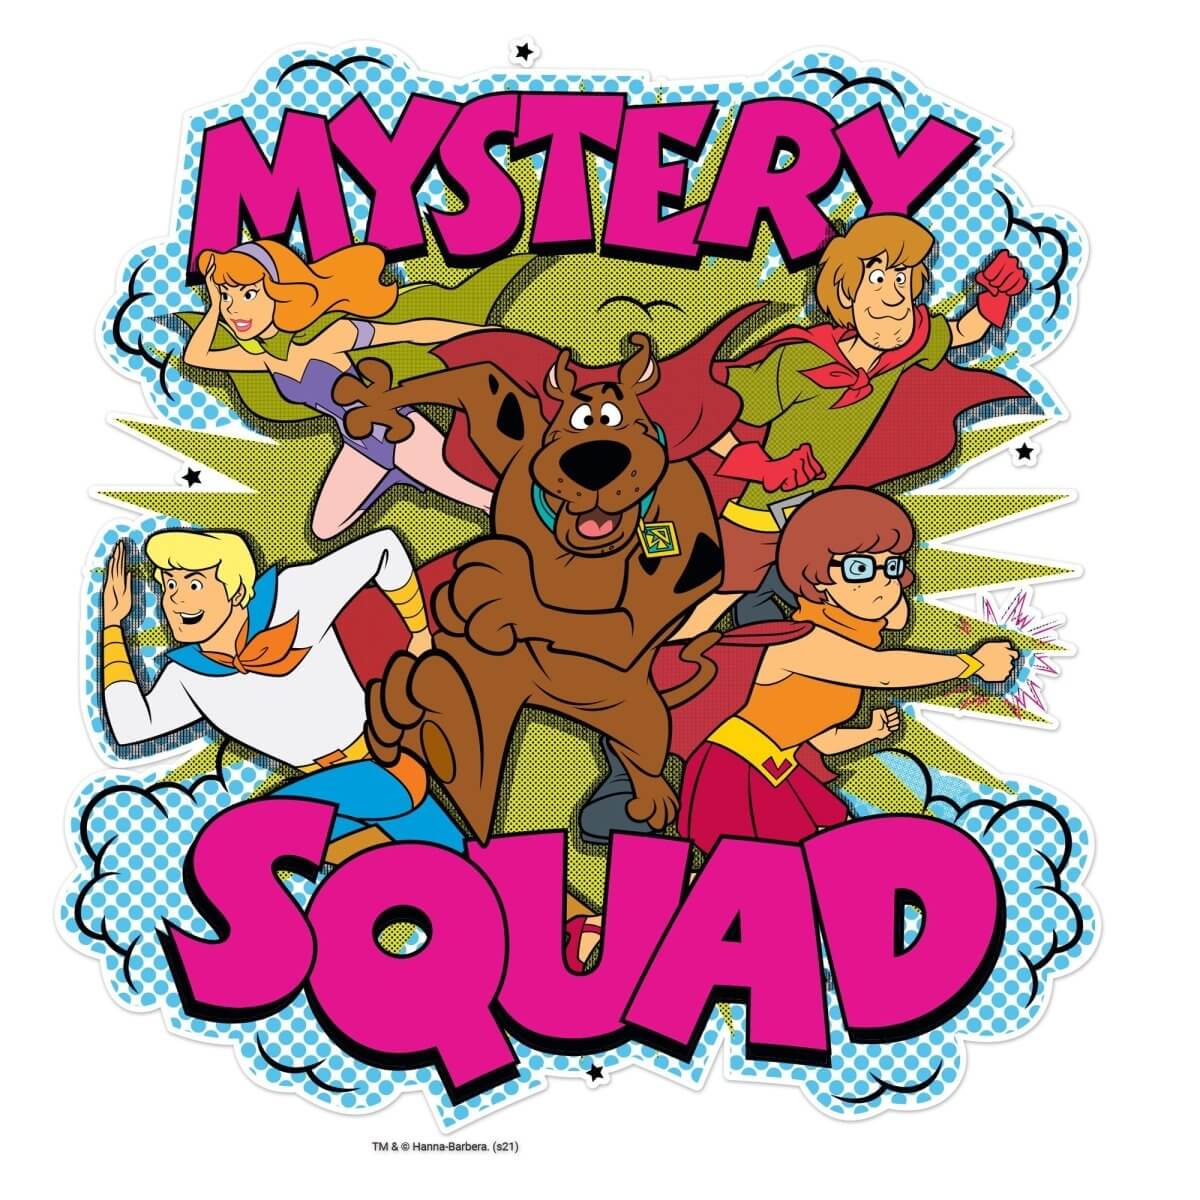 Kismet Decals Home & Room Decor Scooby-Doo and the Mystery Squad Wall decal sticker - officially licensed - latex printed with no solvent odor - Kismet Decals